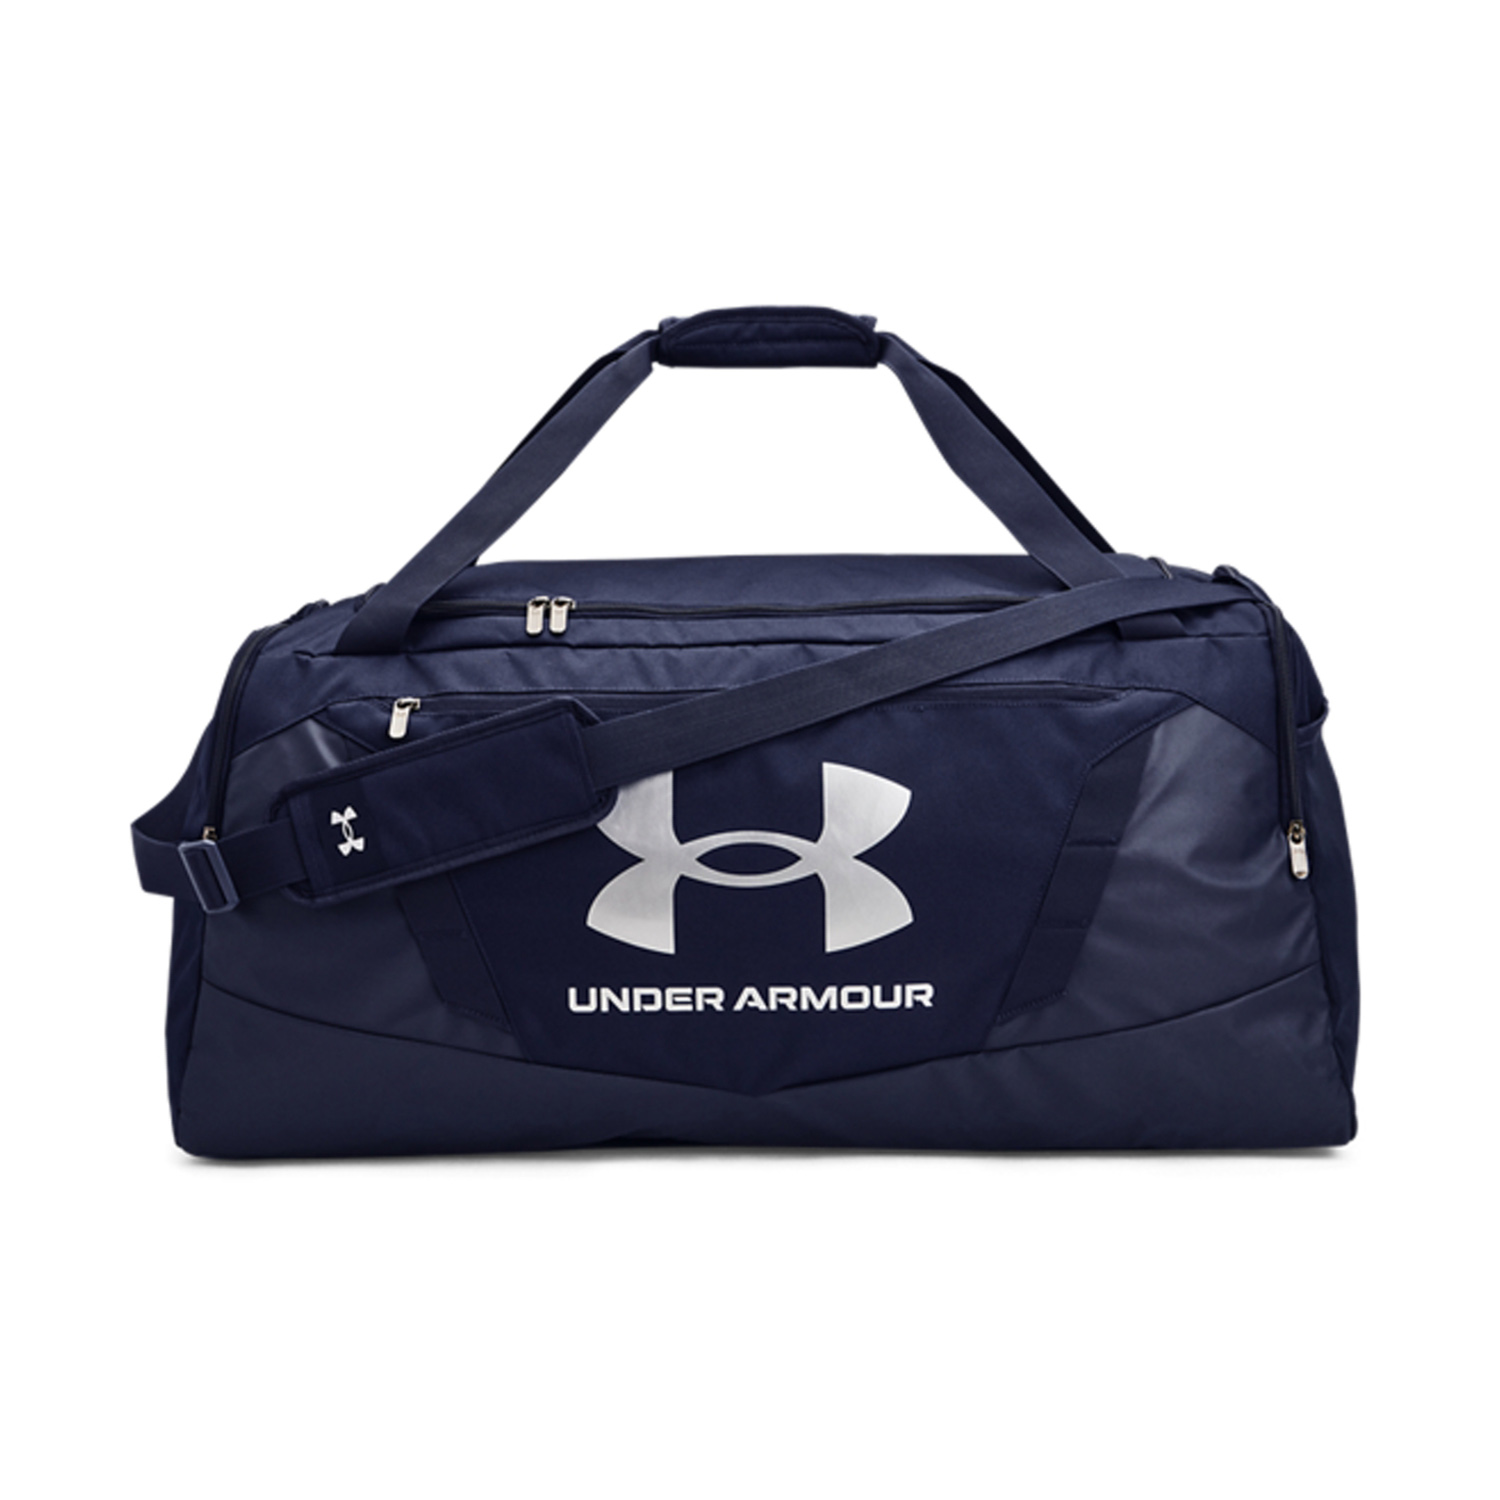 Under Armour Undeniable 5.0 Large Duffle - Midnight Navy/Metallic Silver